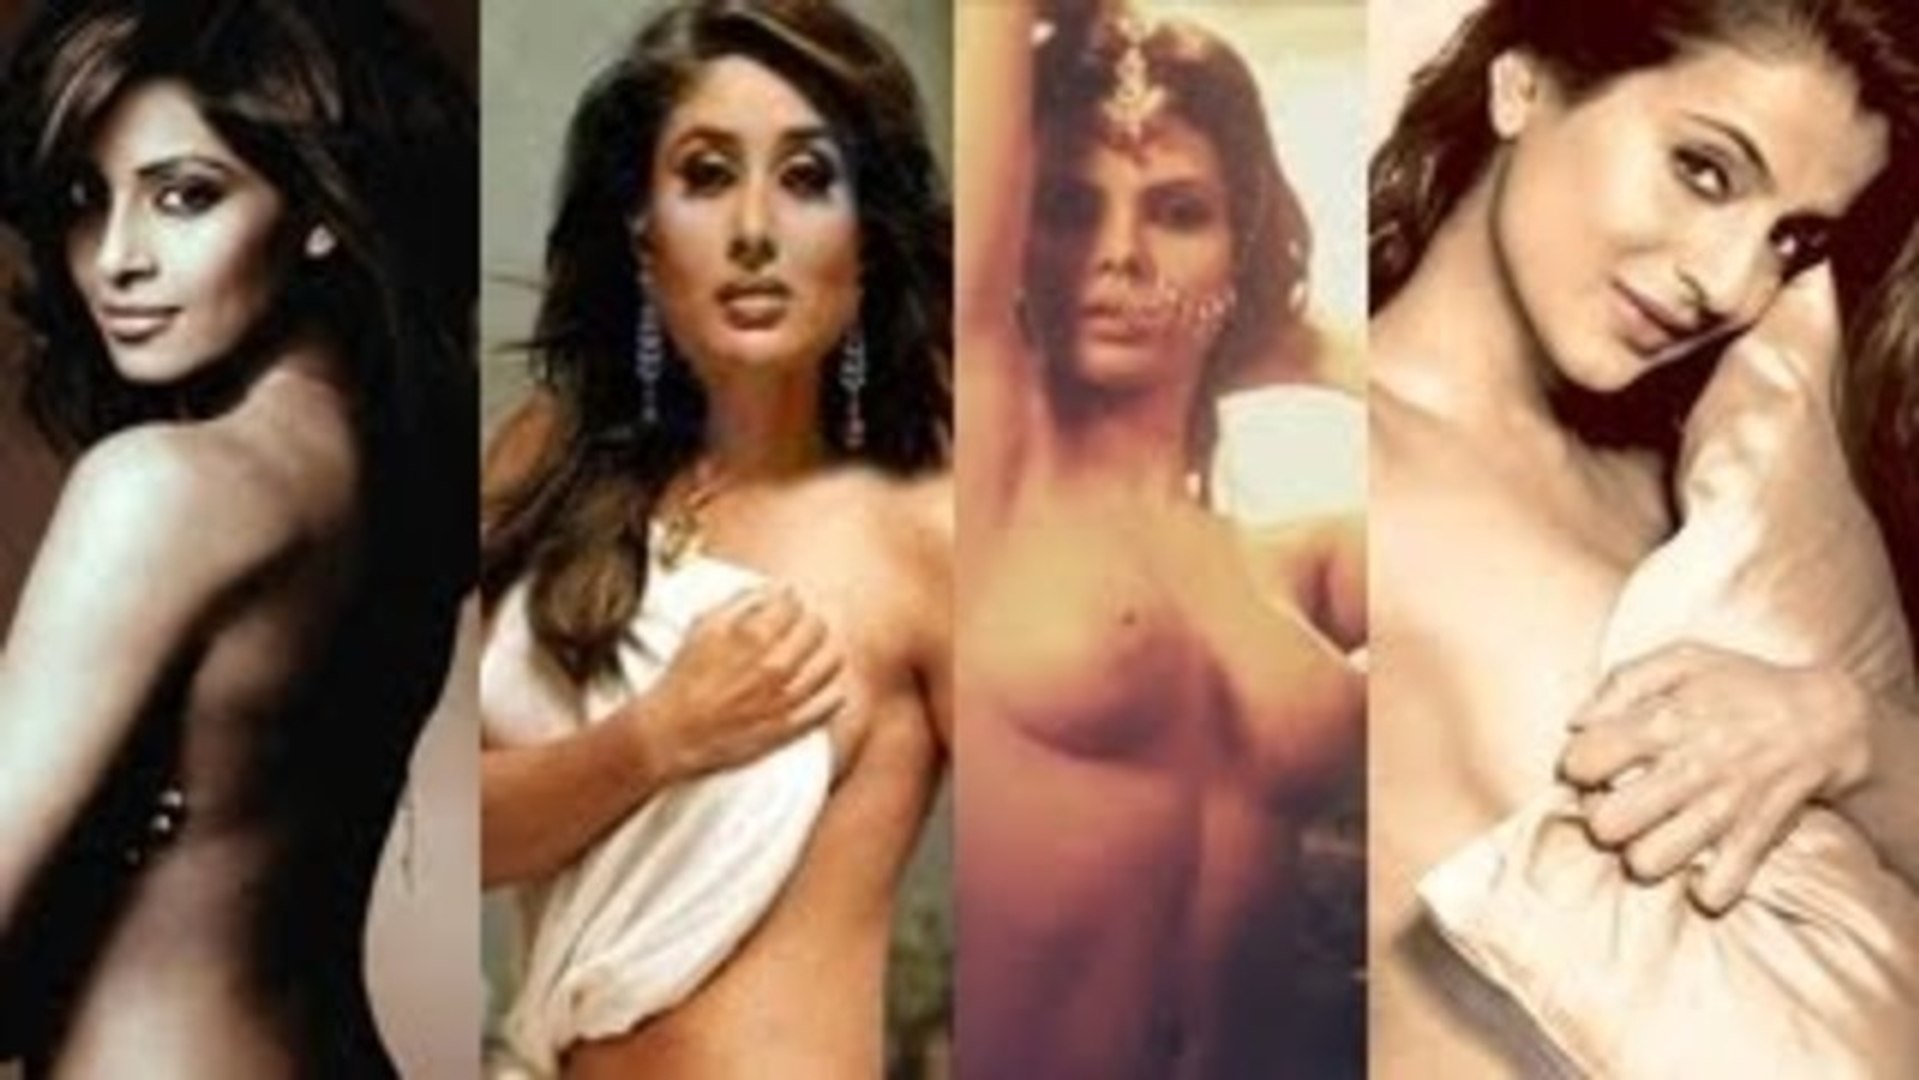 Topless Actresses, Photos | Images of Topless Actresses, - Times of India